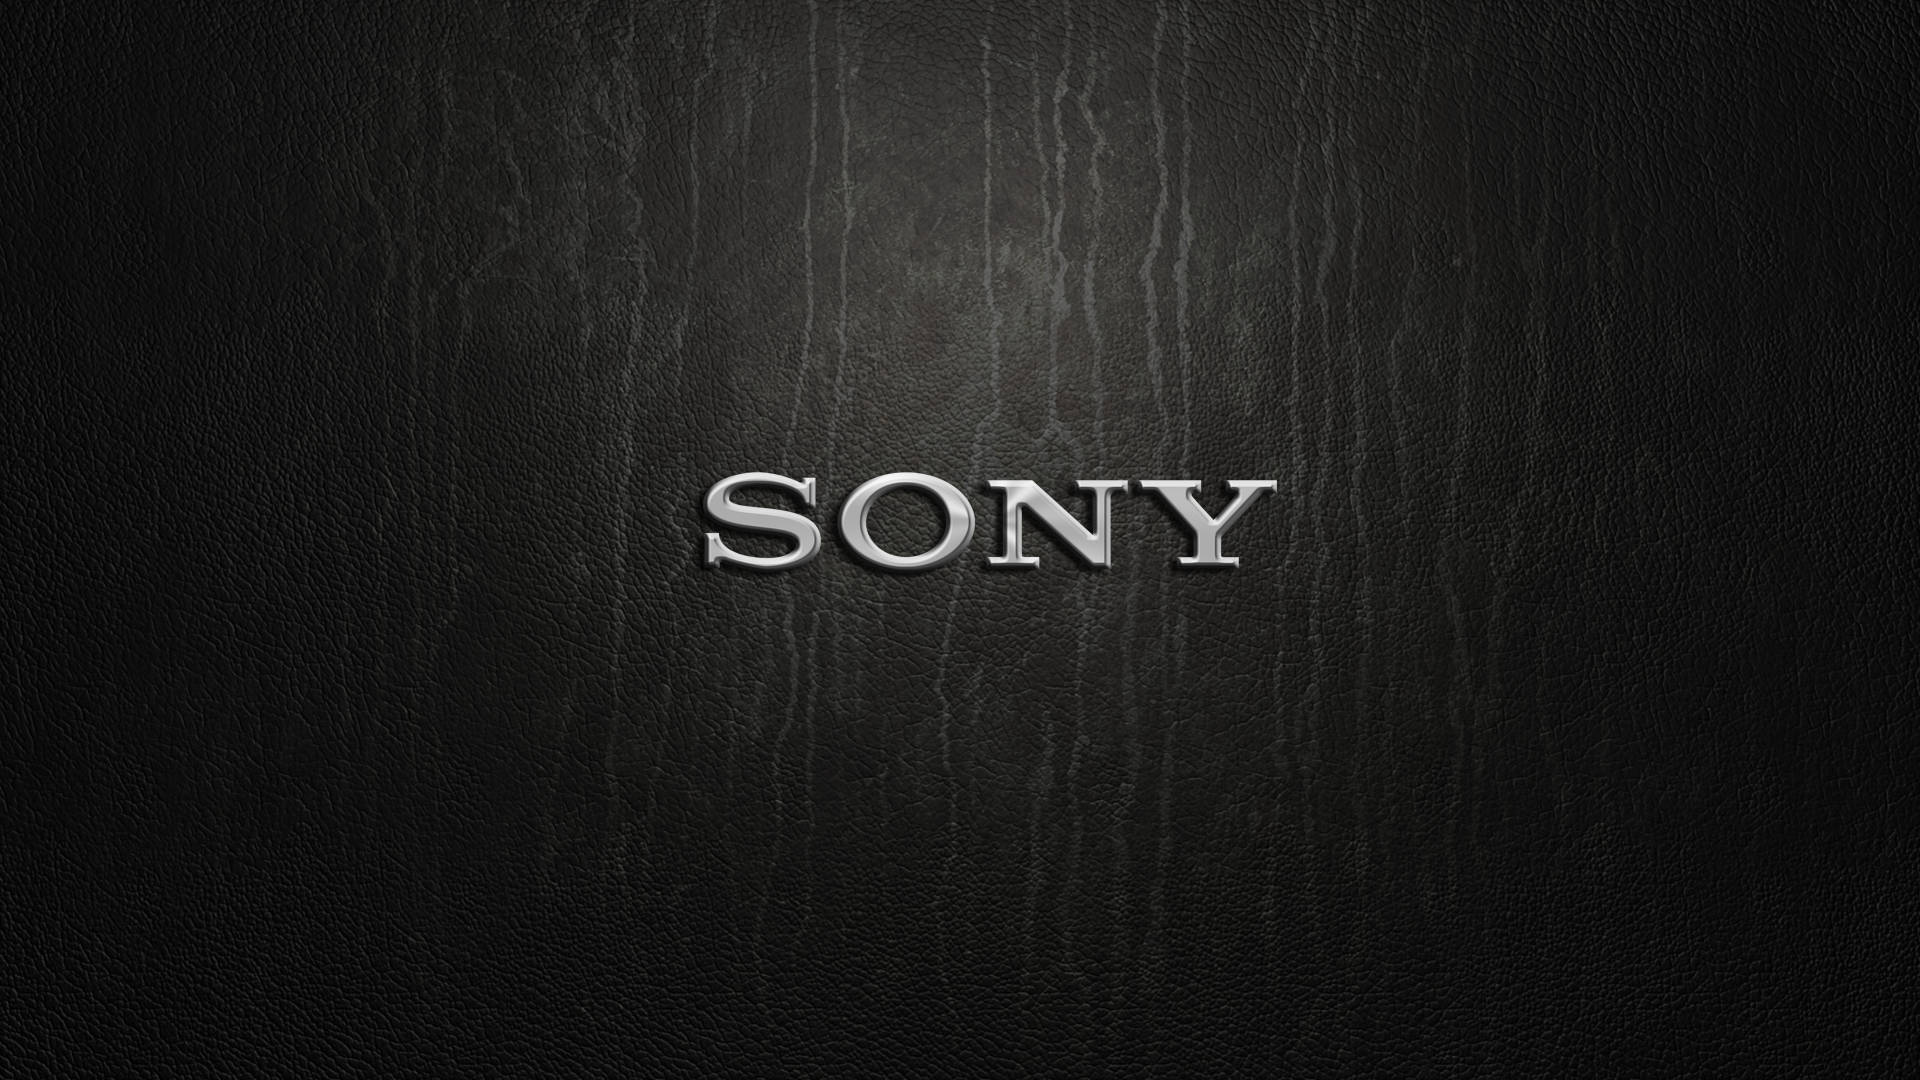 xperia ray wallpapers hd